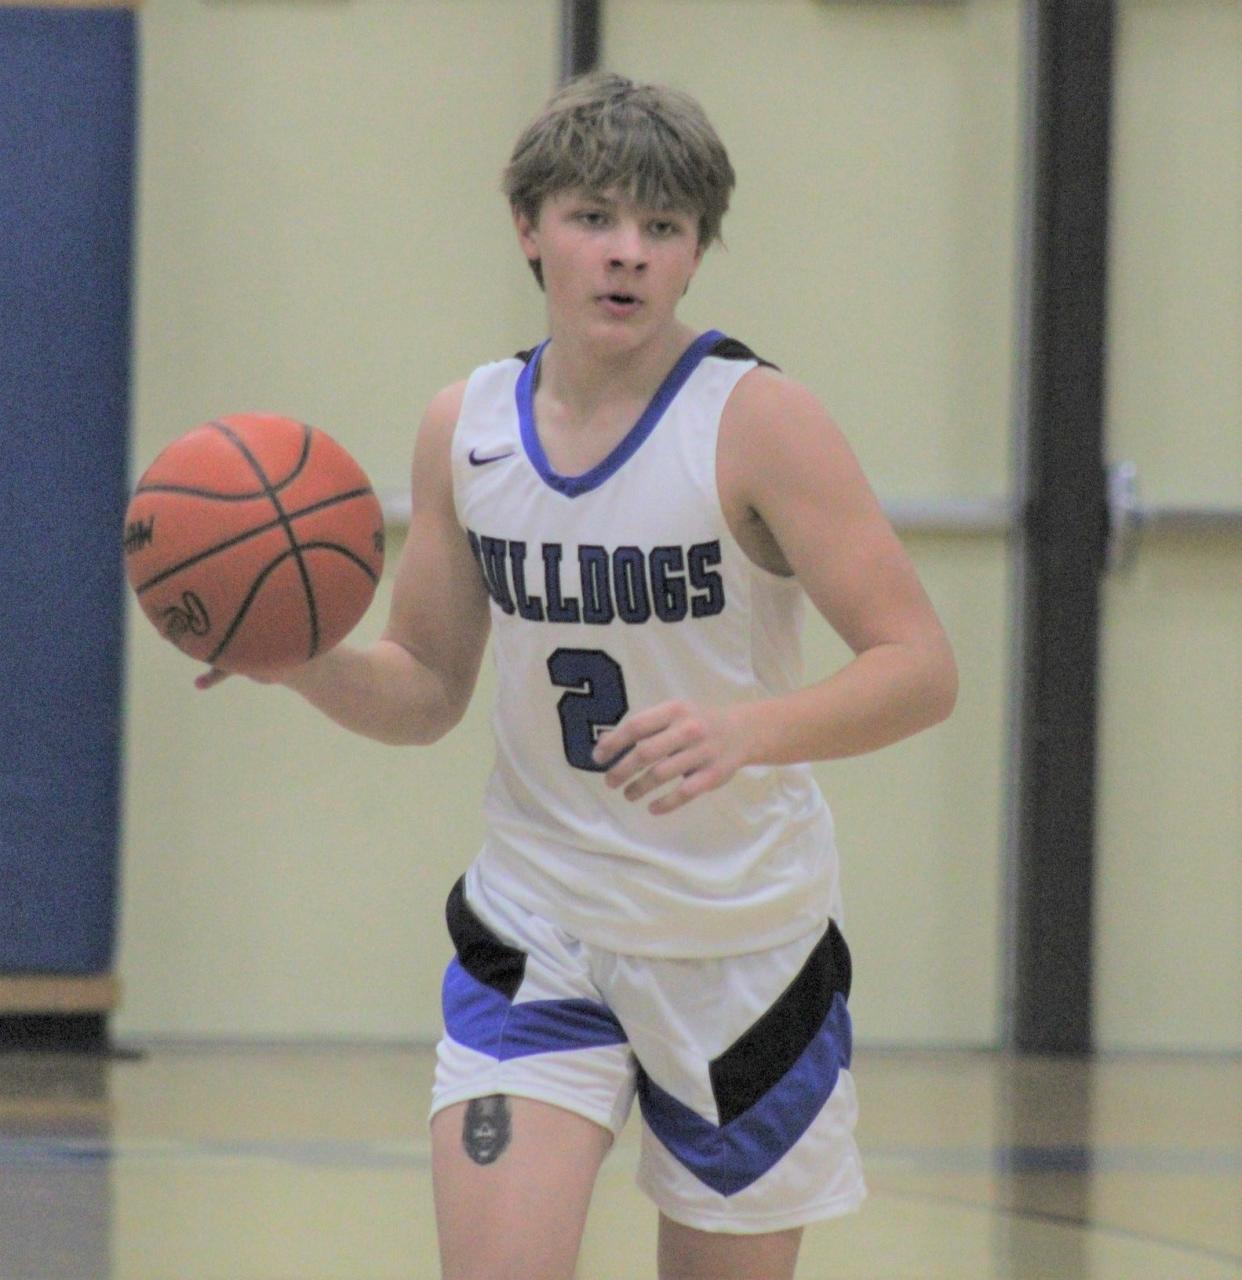 Aidan Fenstermaker scored 15 points and helped lift the Inland Lakes boys to a victory at Pellston on Thursday.